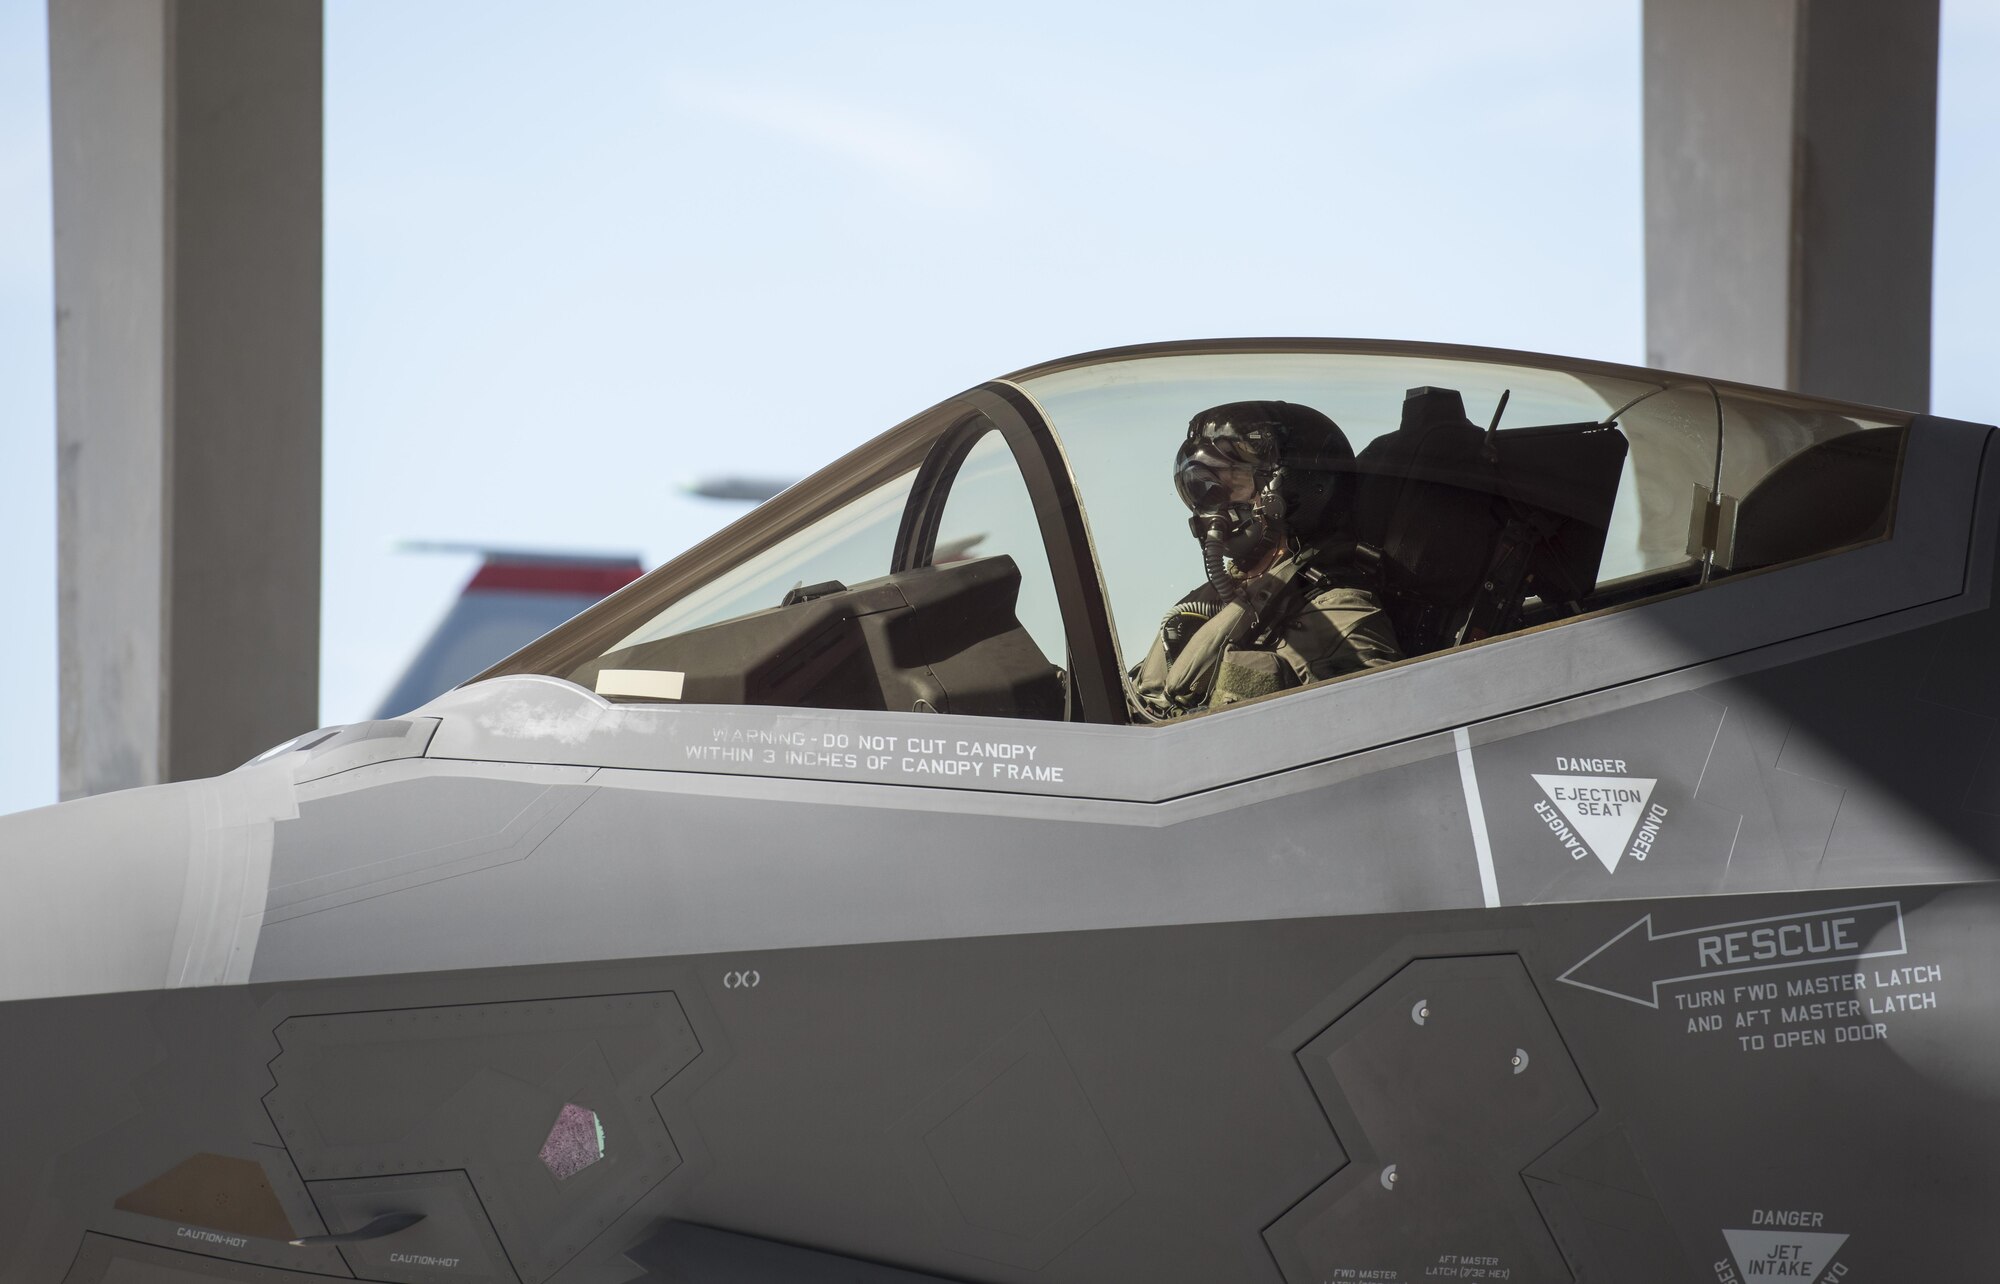 A U.S. Air Force F-35A Lightning II pilot from Hill Air Force Base, Utah, prepares his fighter jet for the first F-35A take-off from Kadena Air Base, Japan, Nov. 7, 2017. The F-35A gives global precision attack capability against current and emerging threats while complementing the air superiority of the aircraft fleets around them. (U.S. Air Force photo by Senior Airman Omari Bernard)